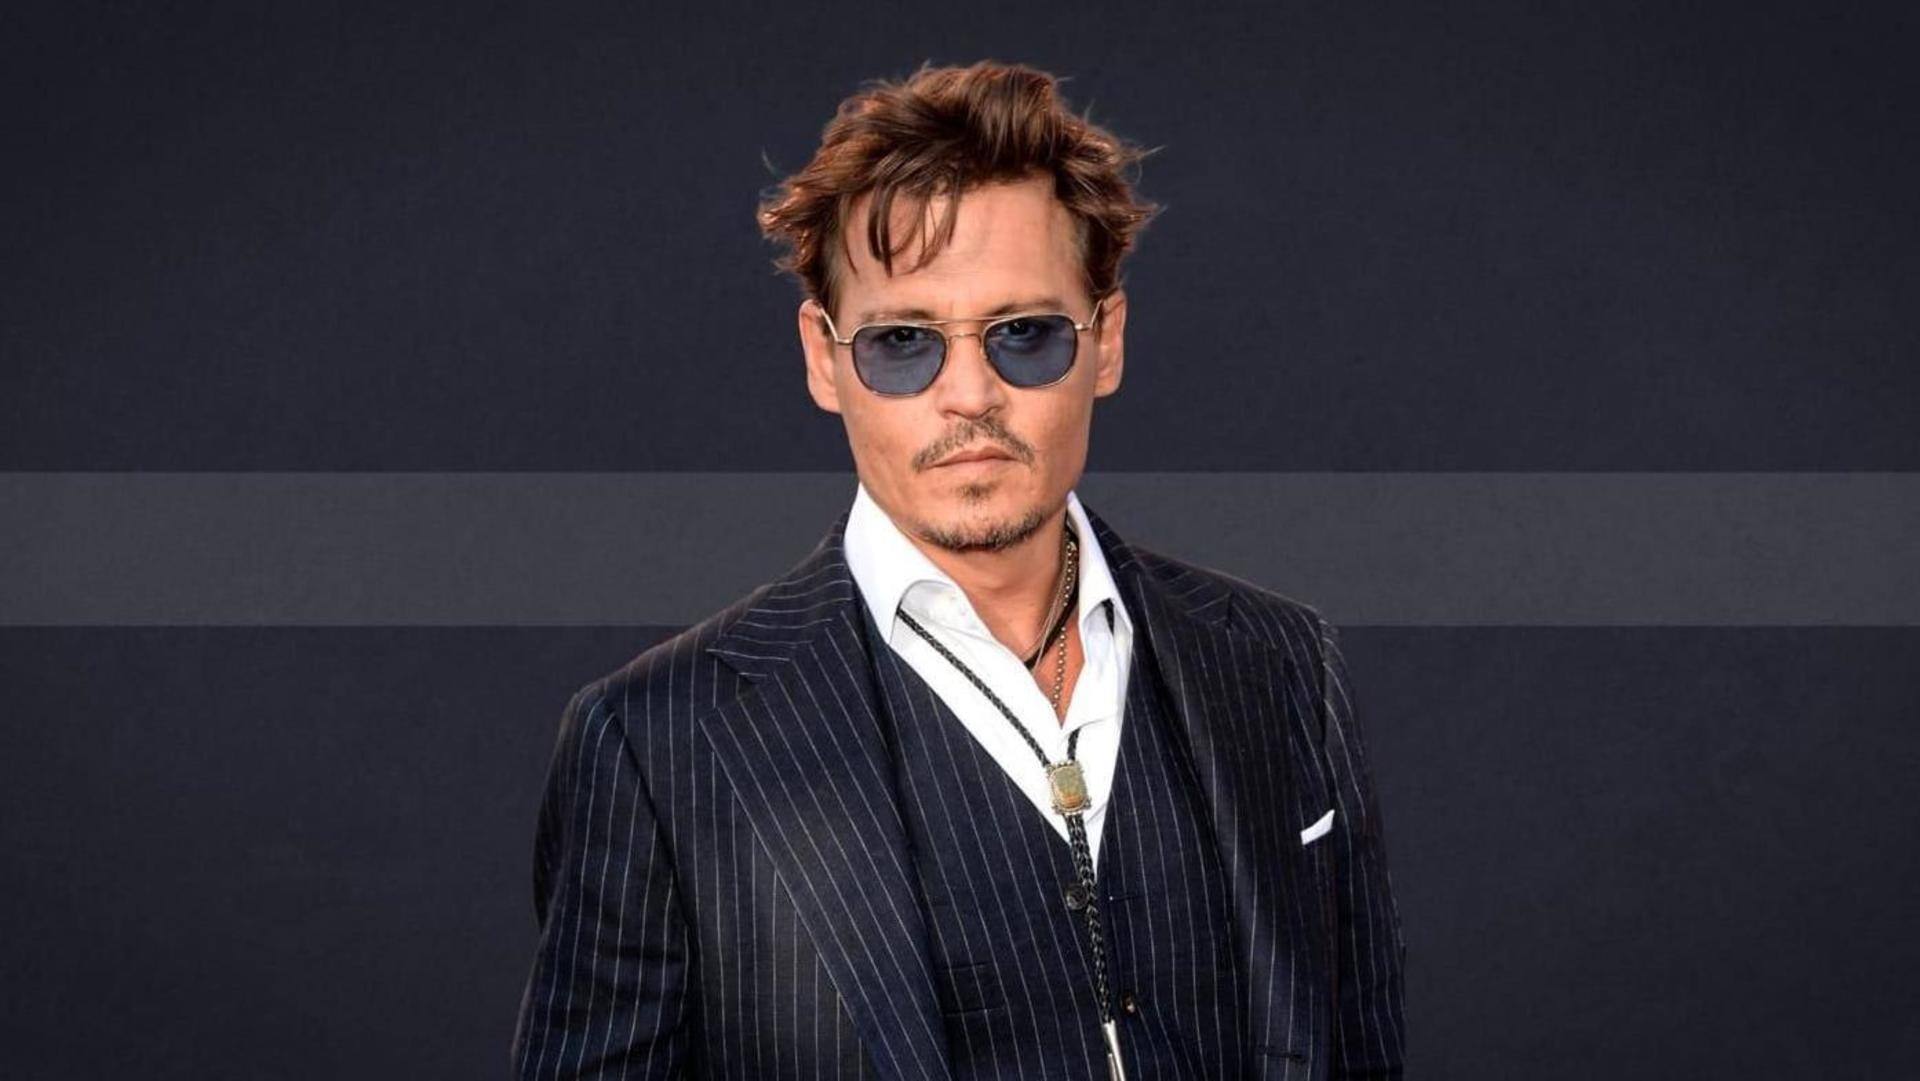 All about Johnny Depp's upcoming directorial biopic titled 'Modi'